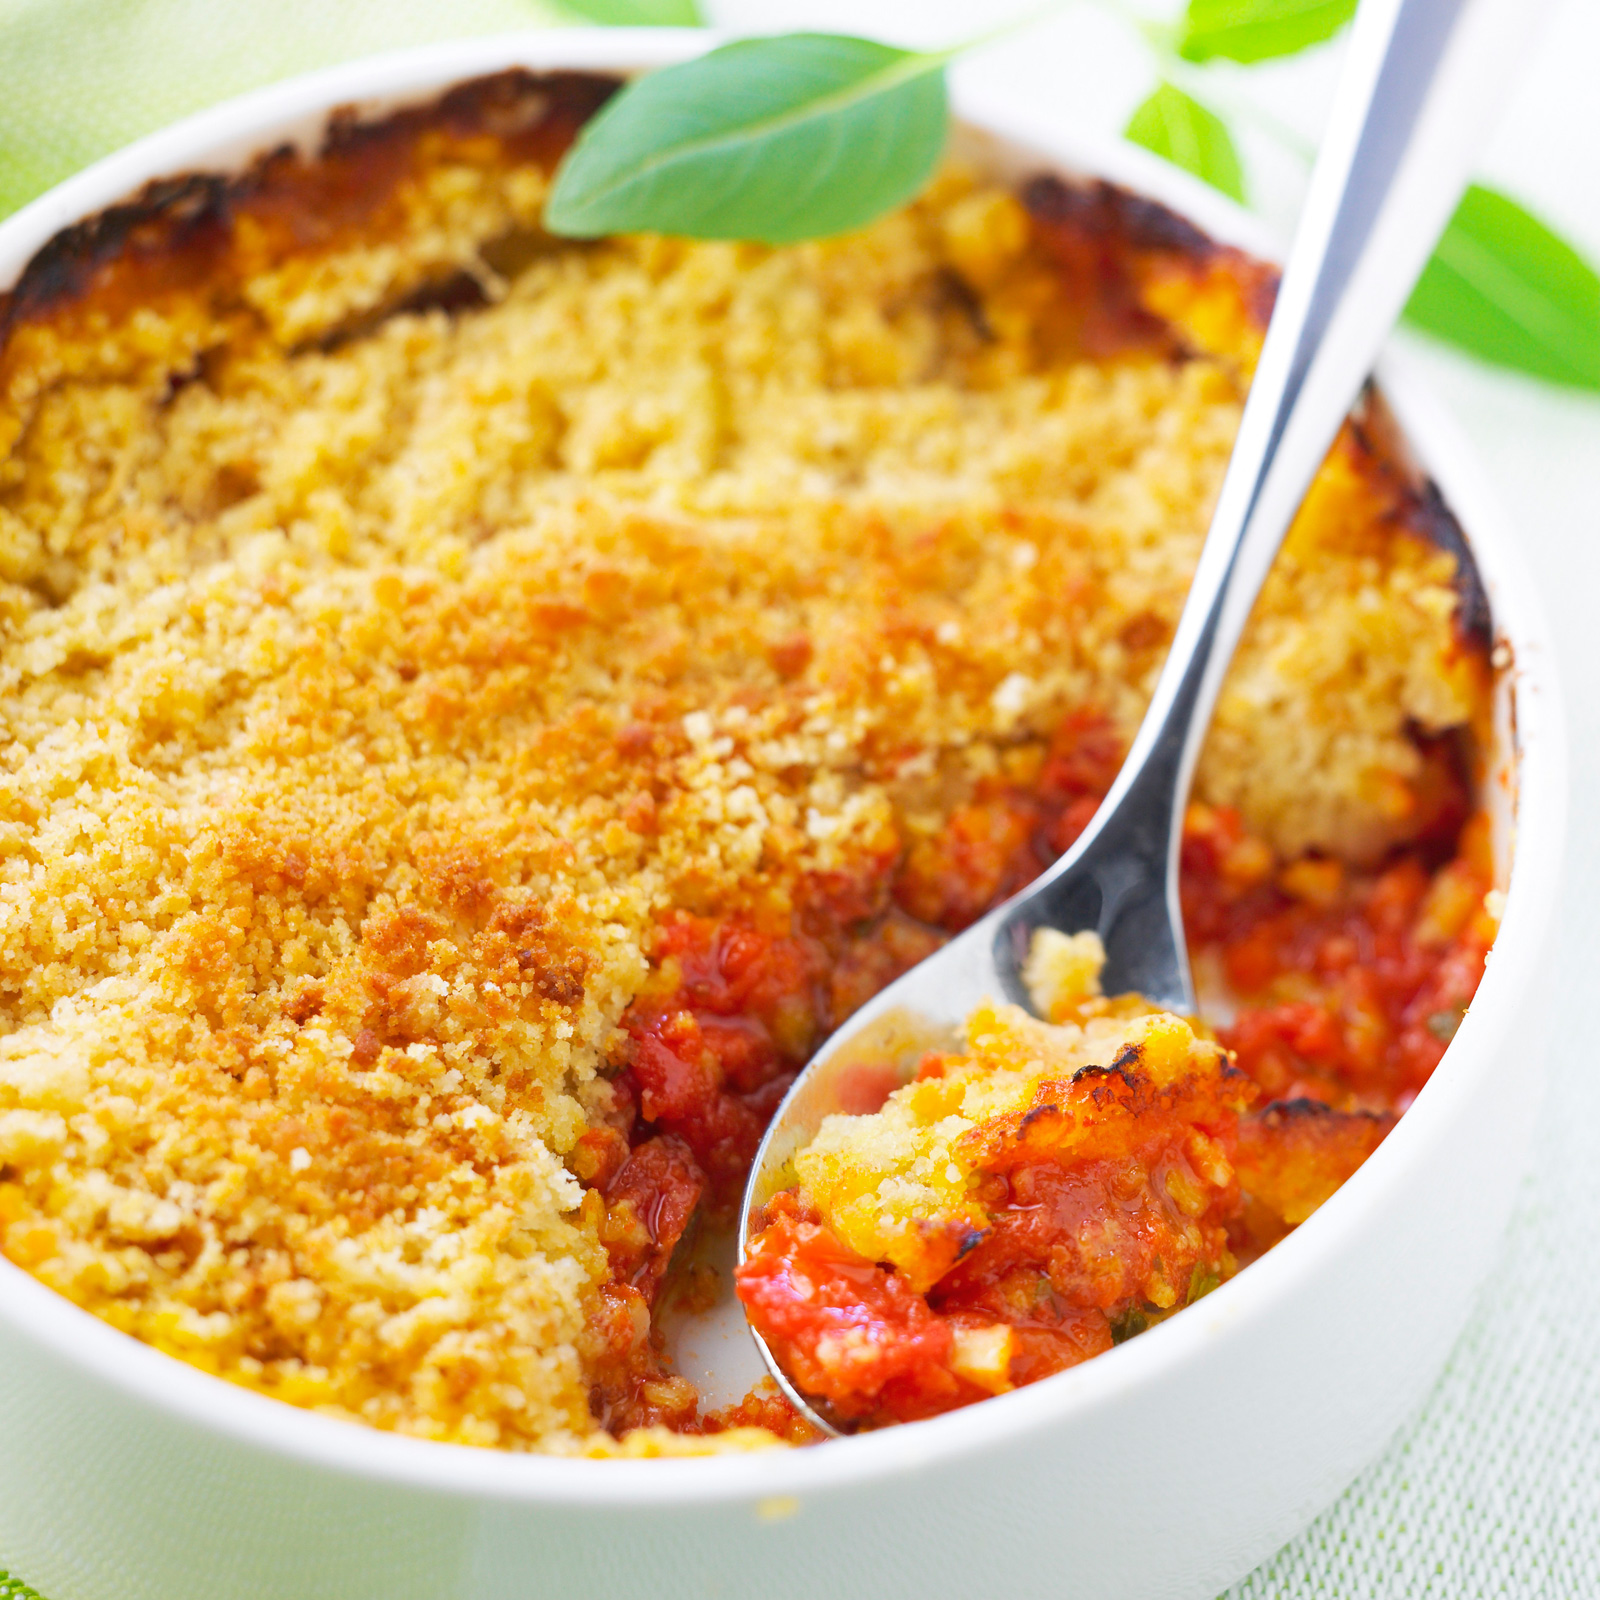 Crumble tomate - courgette